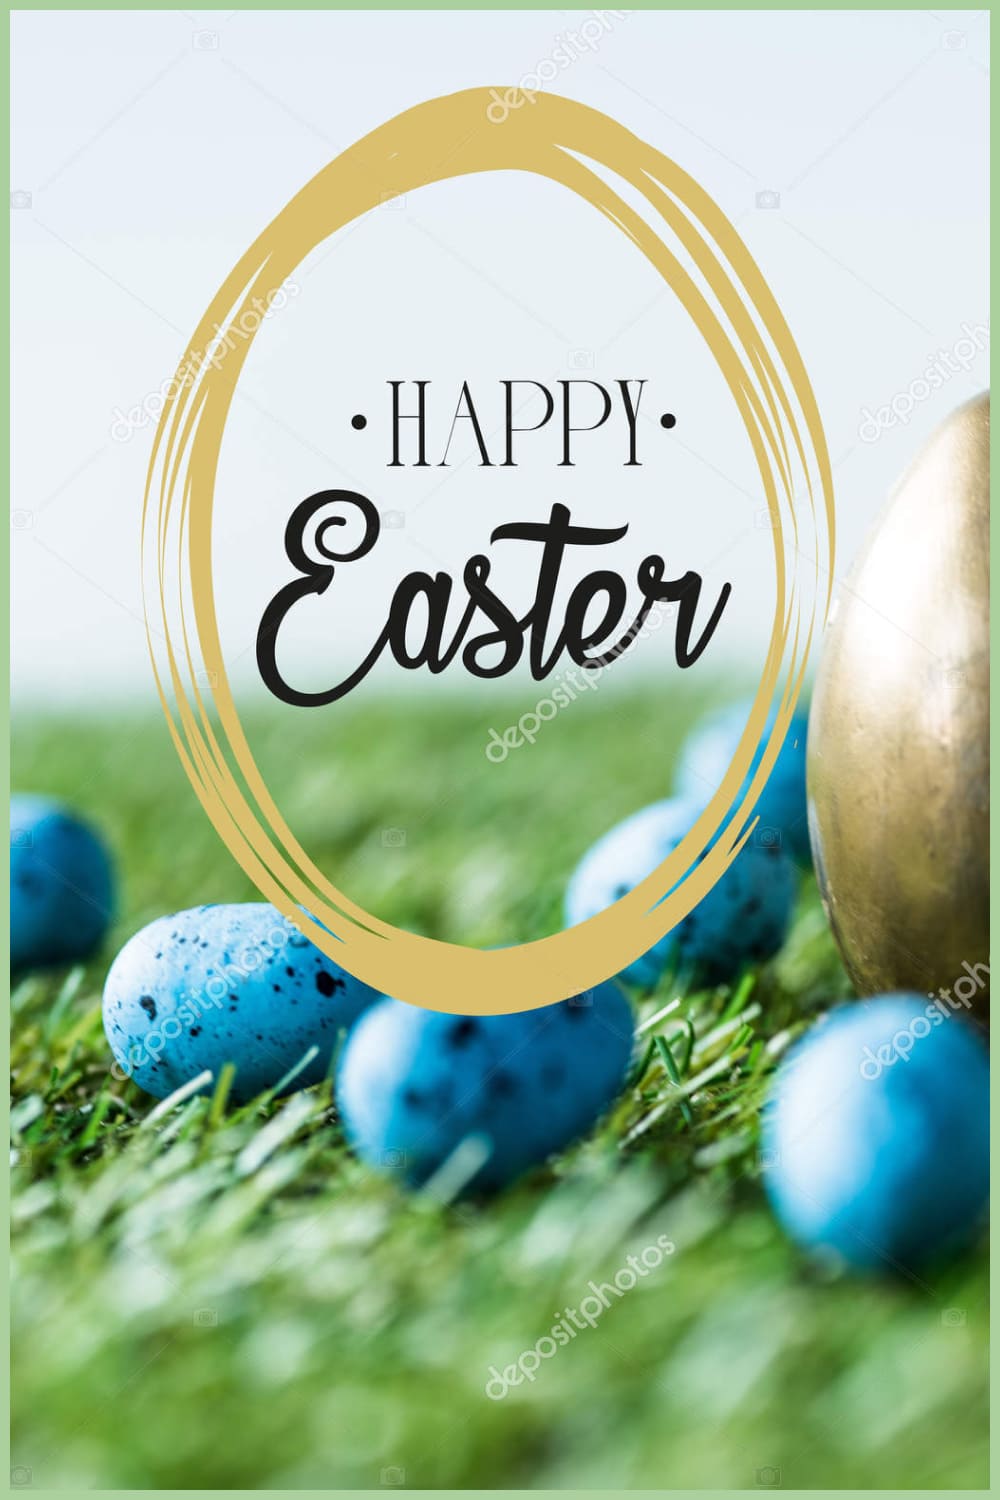 Blue painted quail eggs on green grass near golden chicken egg and happy Easter lettering in circle.